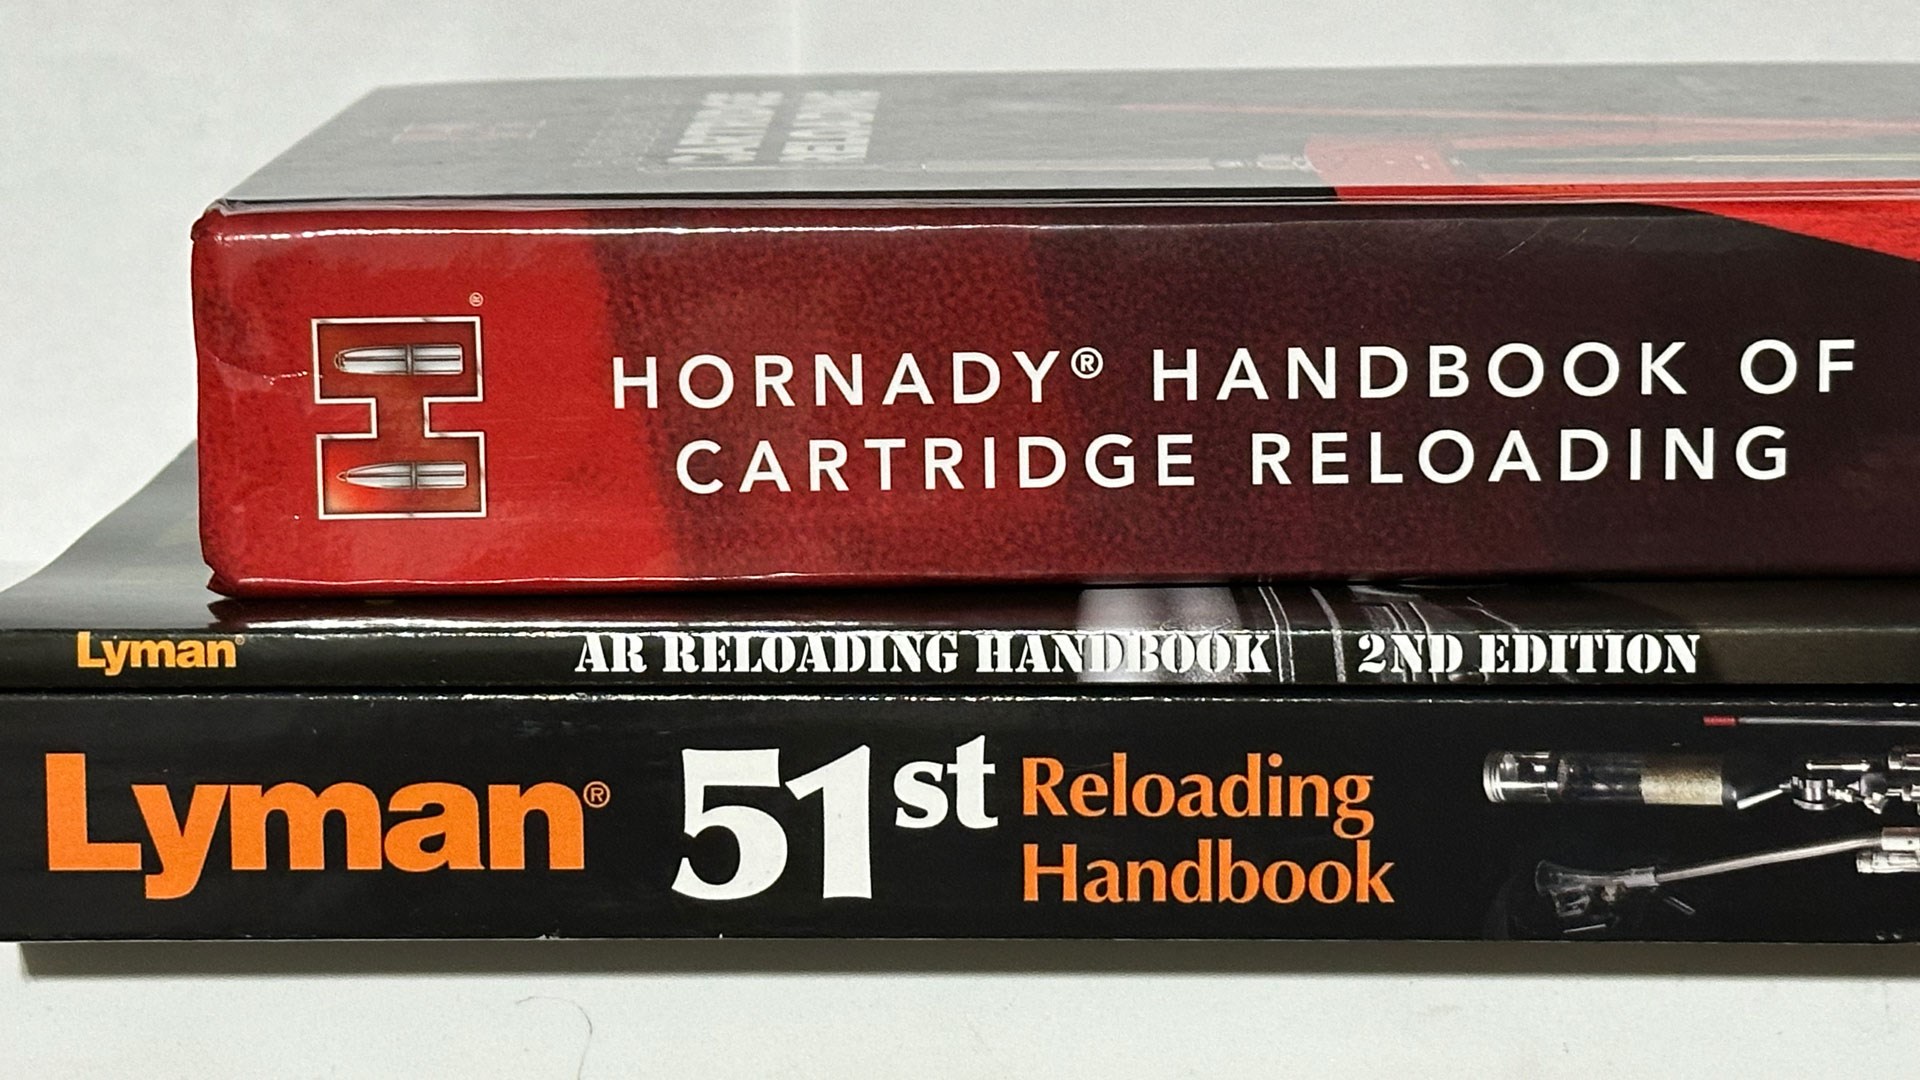 Hornady and Lyman reloading manuals